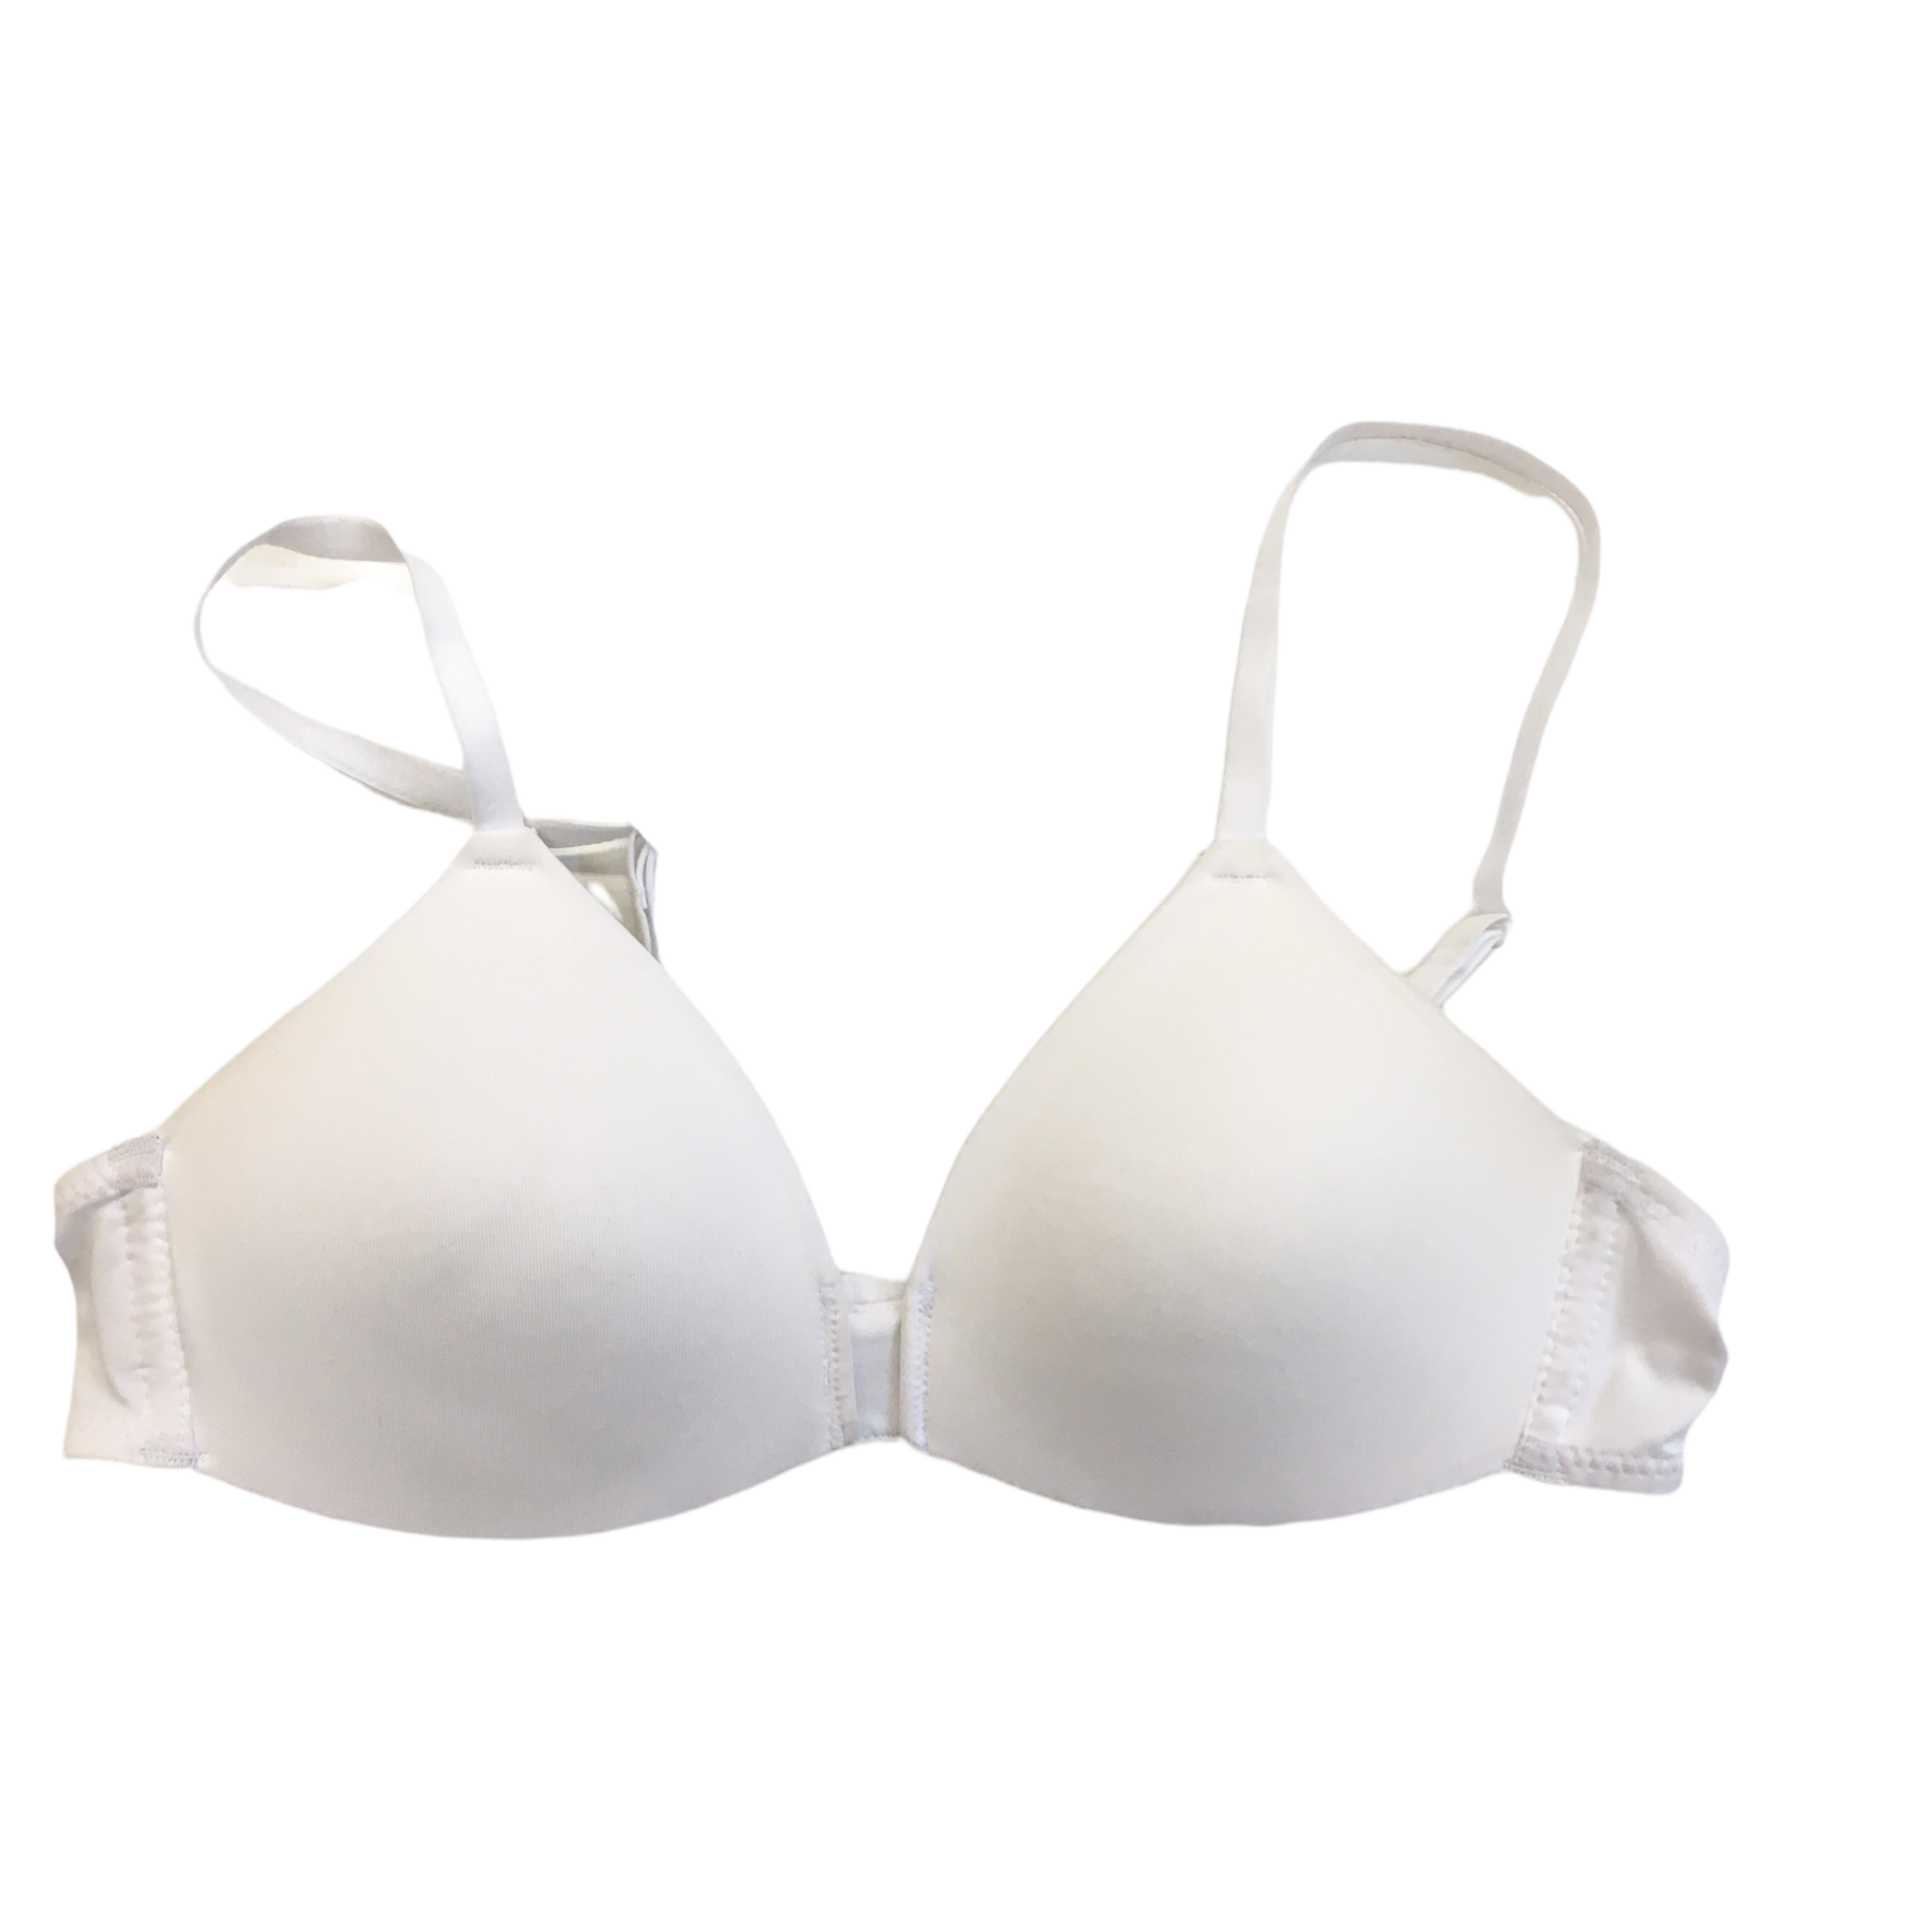 Bra (White), Girl, Size: 32a


#resalerocks #pipsqueakresale #vancouverwa #portland #reusereducerecycle #fashiononabudget #chooseused #consignment #savemoney #shoplocal #weship #keepusopen #shoplocalonline #resale #resaleboutique #mommyandme #minime #fashion #reseller                                                                                                                                      Cross posted, items are located at #PipsqueakResaleBoutique, payments accepted: cash, paypal & credit cards. Any flaws will be described in the comments. More pictures available with link above. Local pick up available at the #VancouverMall, tax will be added (not included in price), shipping available (not included in price, *Clothing, shoes, books & DVDs for $6.99; please contact regarding shipment of toys or other larger items), item can be placed on hold with communication, message with any questions. Join Pipsqueak Resale - Online to see all the new items! Follow us on IG @pipsqueakresale & Thanks for looking! Due to the nature of consignment, any known flaws will be described; ALL SHIPPED SALES ARE FINAL. All items are currently located inside Pipsqueak Resale Boutique as a store front items purchased on location before items are prepared for shipment will be refunded.